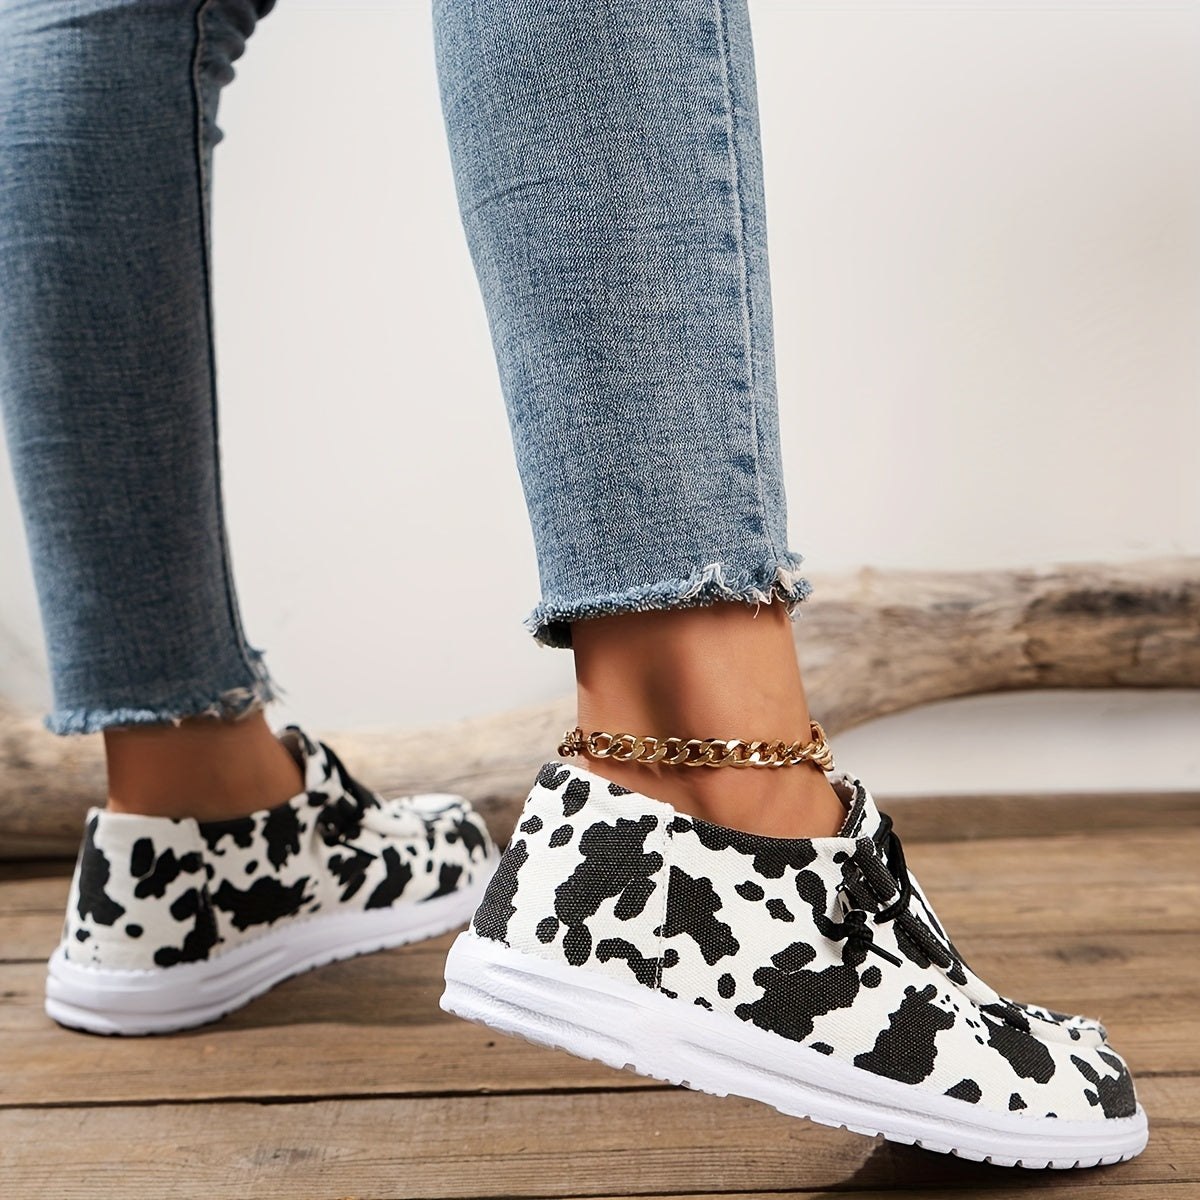 Women's Cow Pattern Canvas Shoes, Casual Lace Up Outdoor Shoes, Lightweight Low Top Sneakers